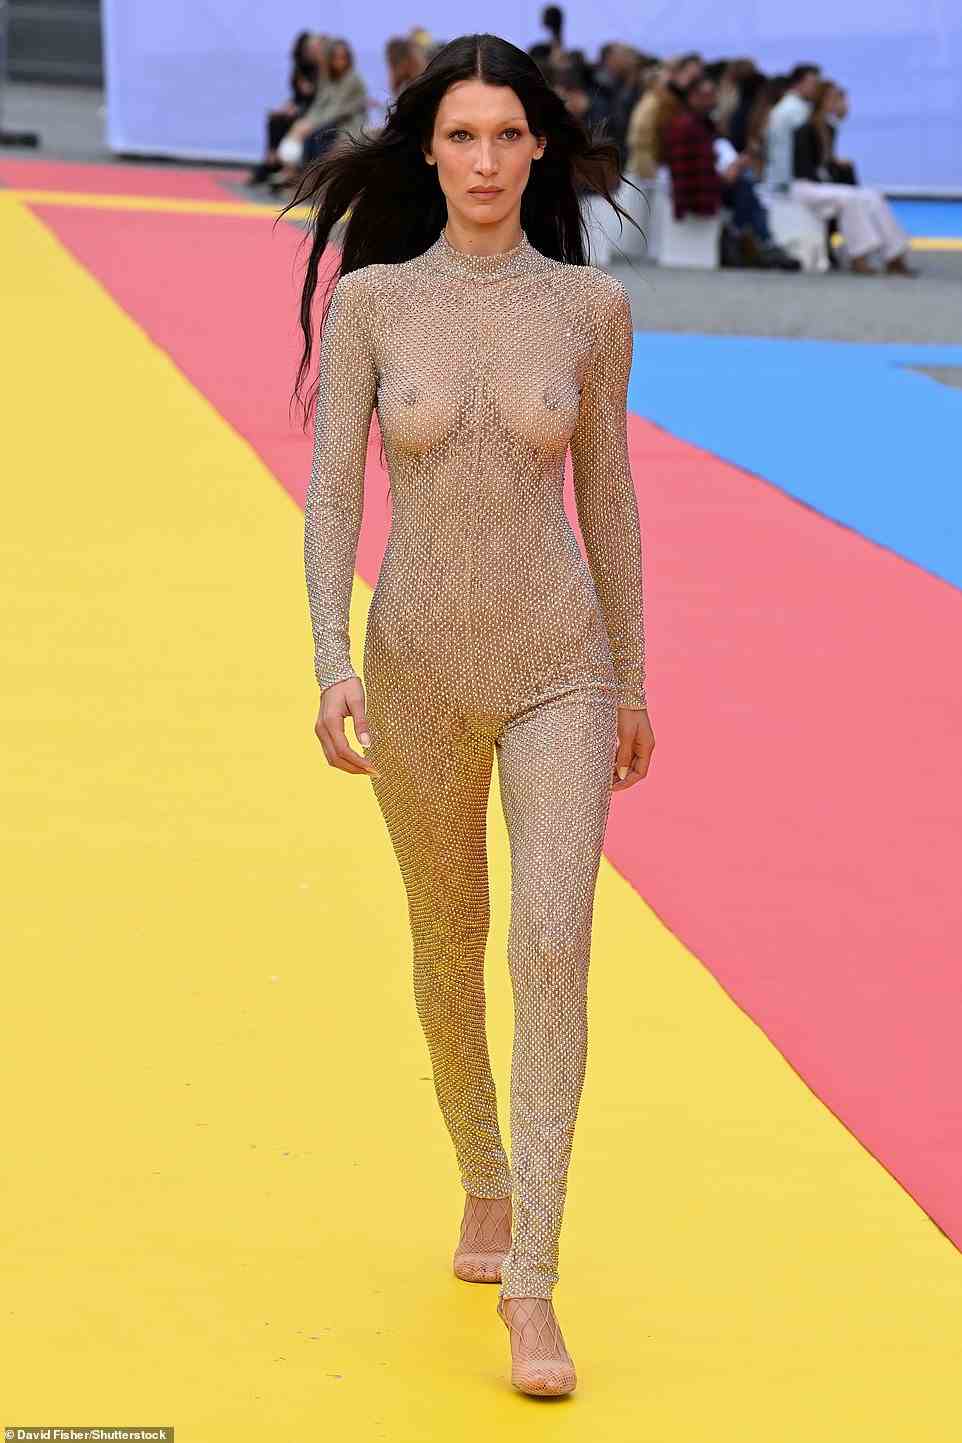 Eye-popping: Elsewhere, Bella Hadid certainly turned heads when she walked the runway for Stella McCartney, going braless under a sheer nude unitard which was covered in embellishments